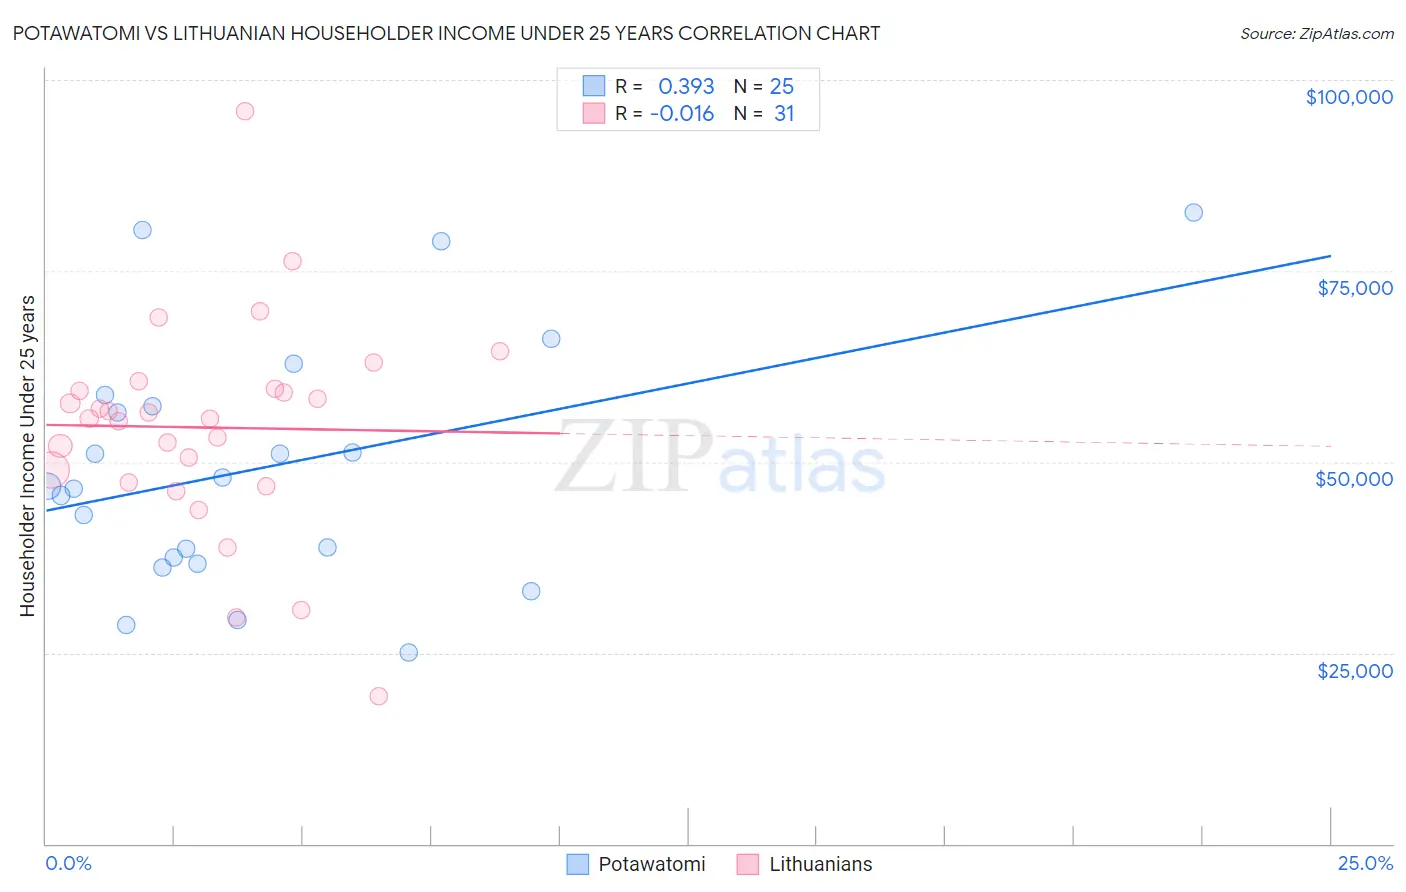 Potawatomi vs Lithuanian Householder Income Under 25 years